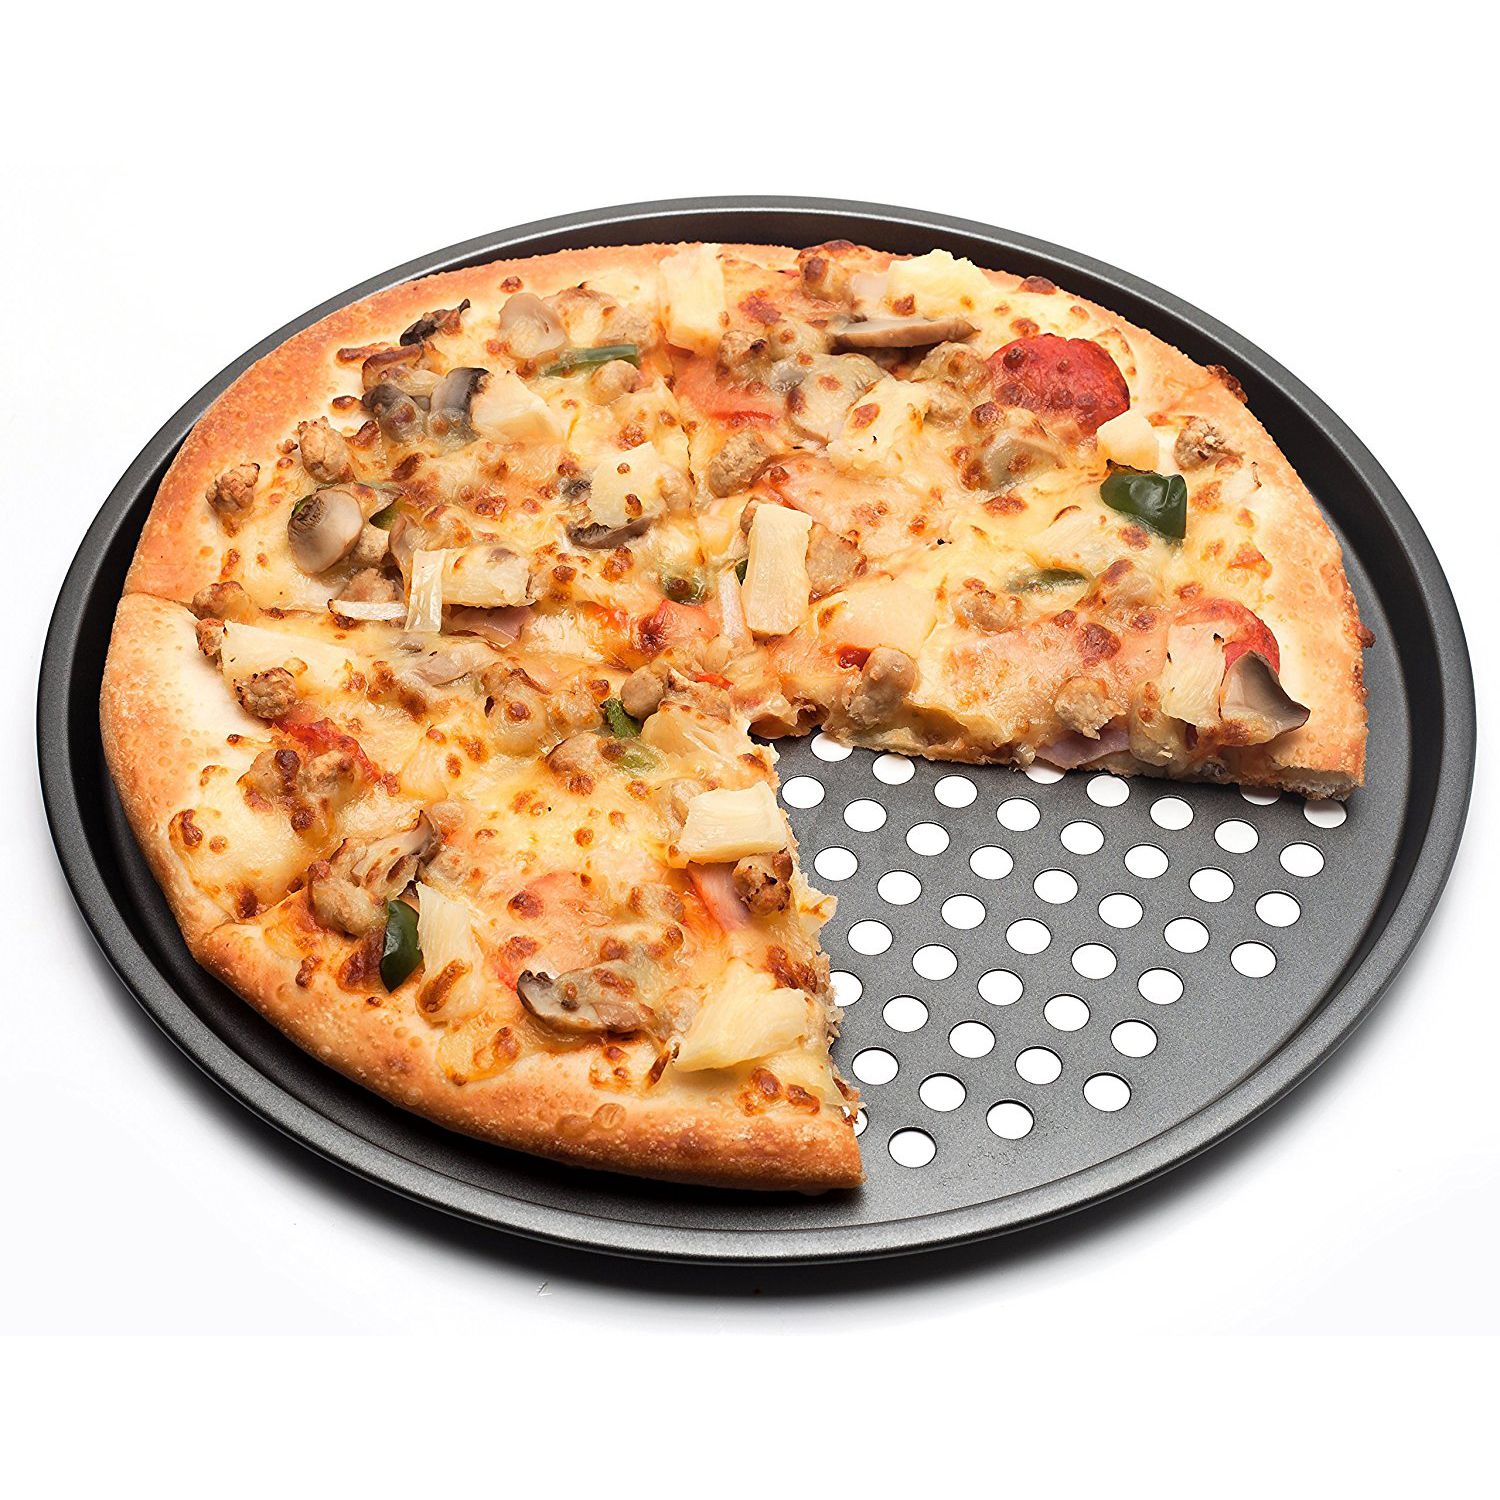 

Cake tools Carbon Steel Nonstick Pizza Baking Pan Tray 26cm 28cm 32cm Pizza-Plate Dishes Holder Bakeware Home Kitchen Accessories